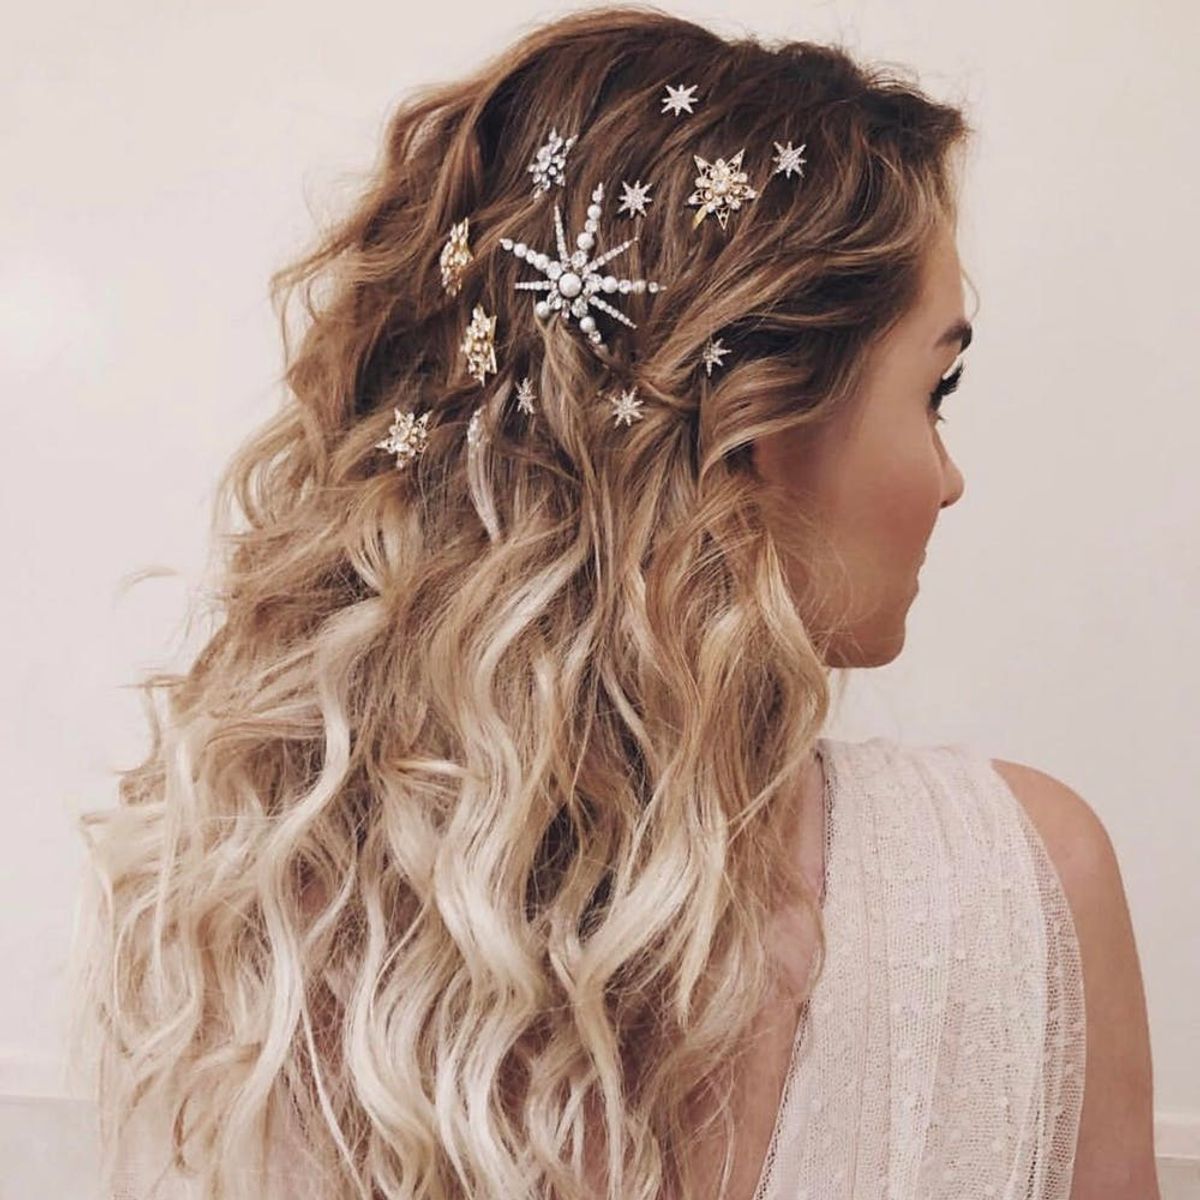 5 Quick and Easy Holiday Hairstyles That Take 5 Minutes